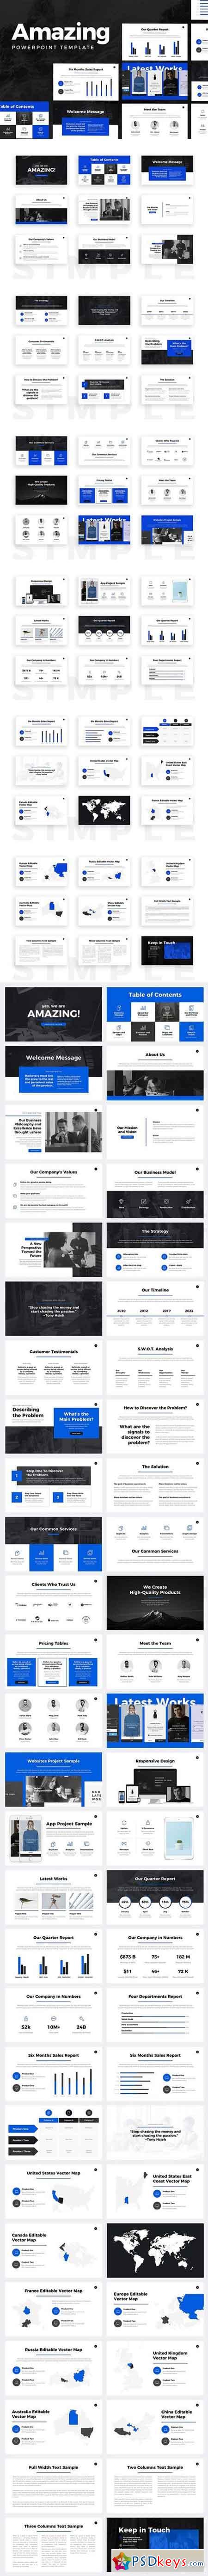 Amazing PowerPoint Template 1890650